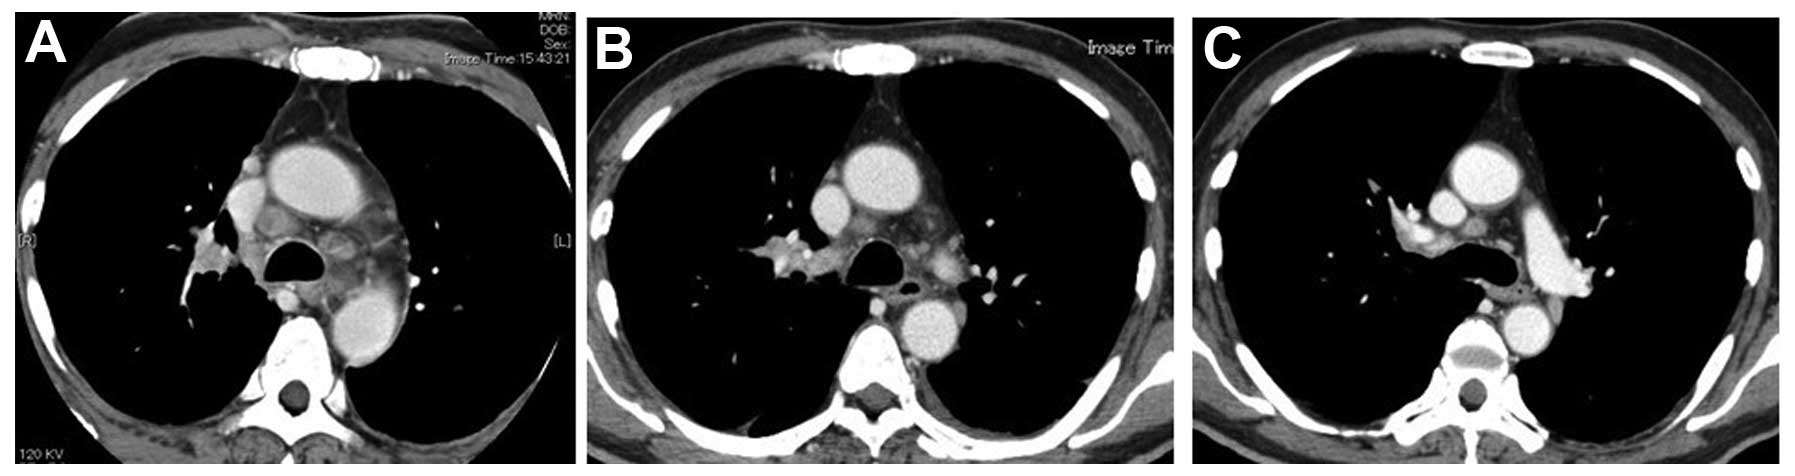 Lung Cancer With Spontaneous Regression Of Primary And Metastatic Sites